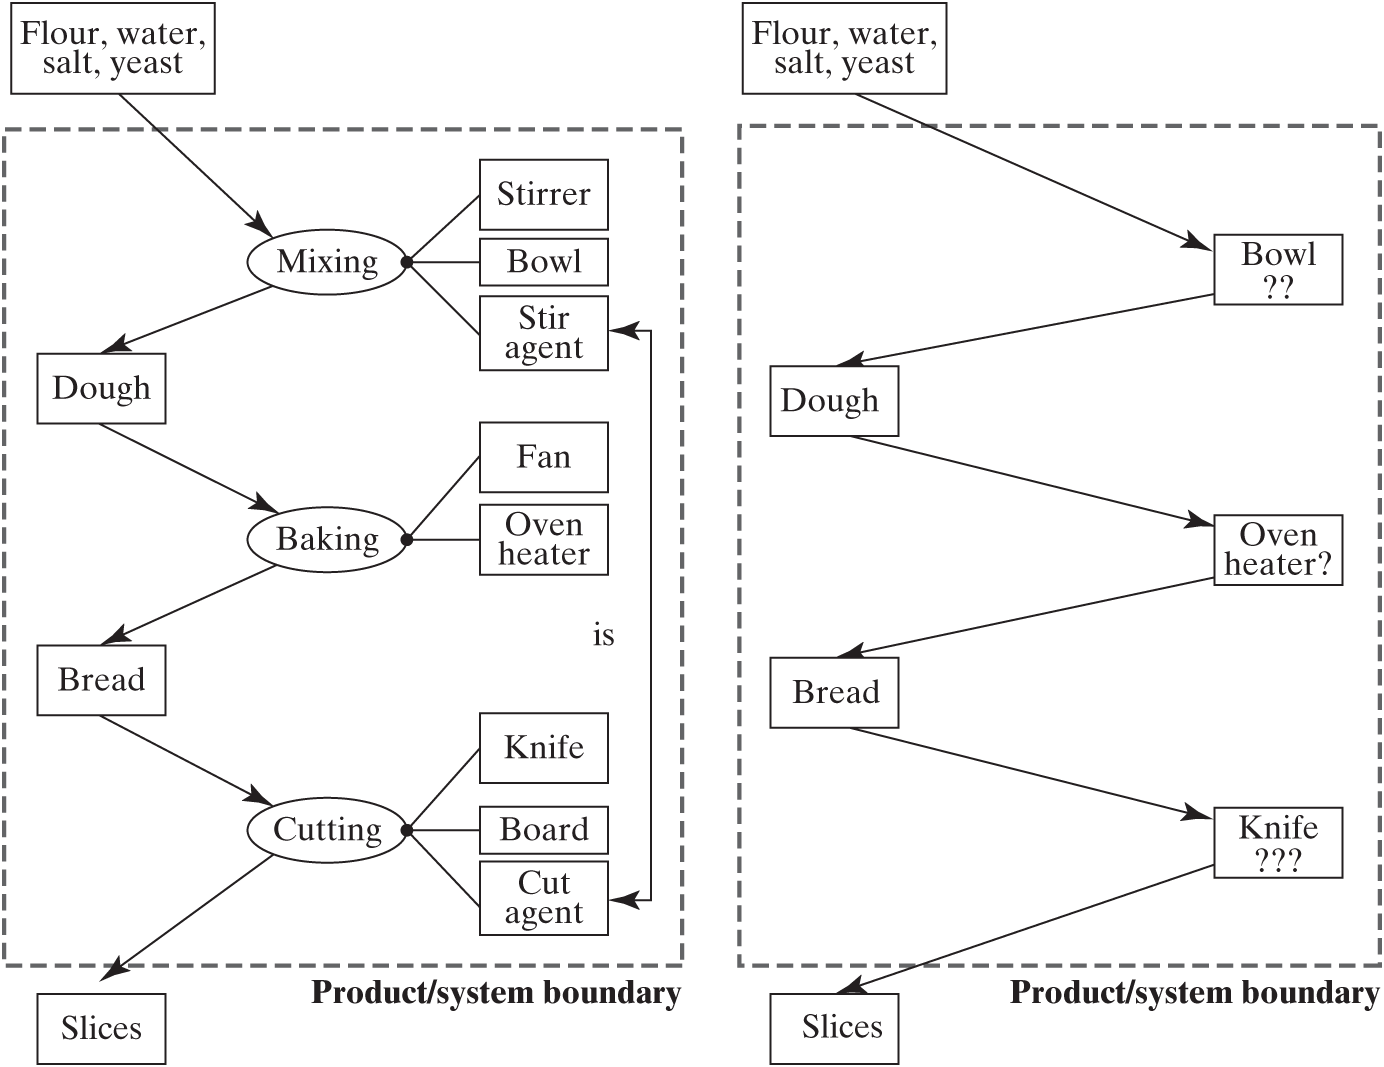 Two diagrams of a not so simple system architecture of sliced bread making. Each part denoted with labeled rectangles and ovals.